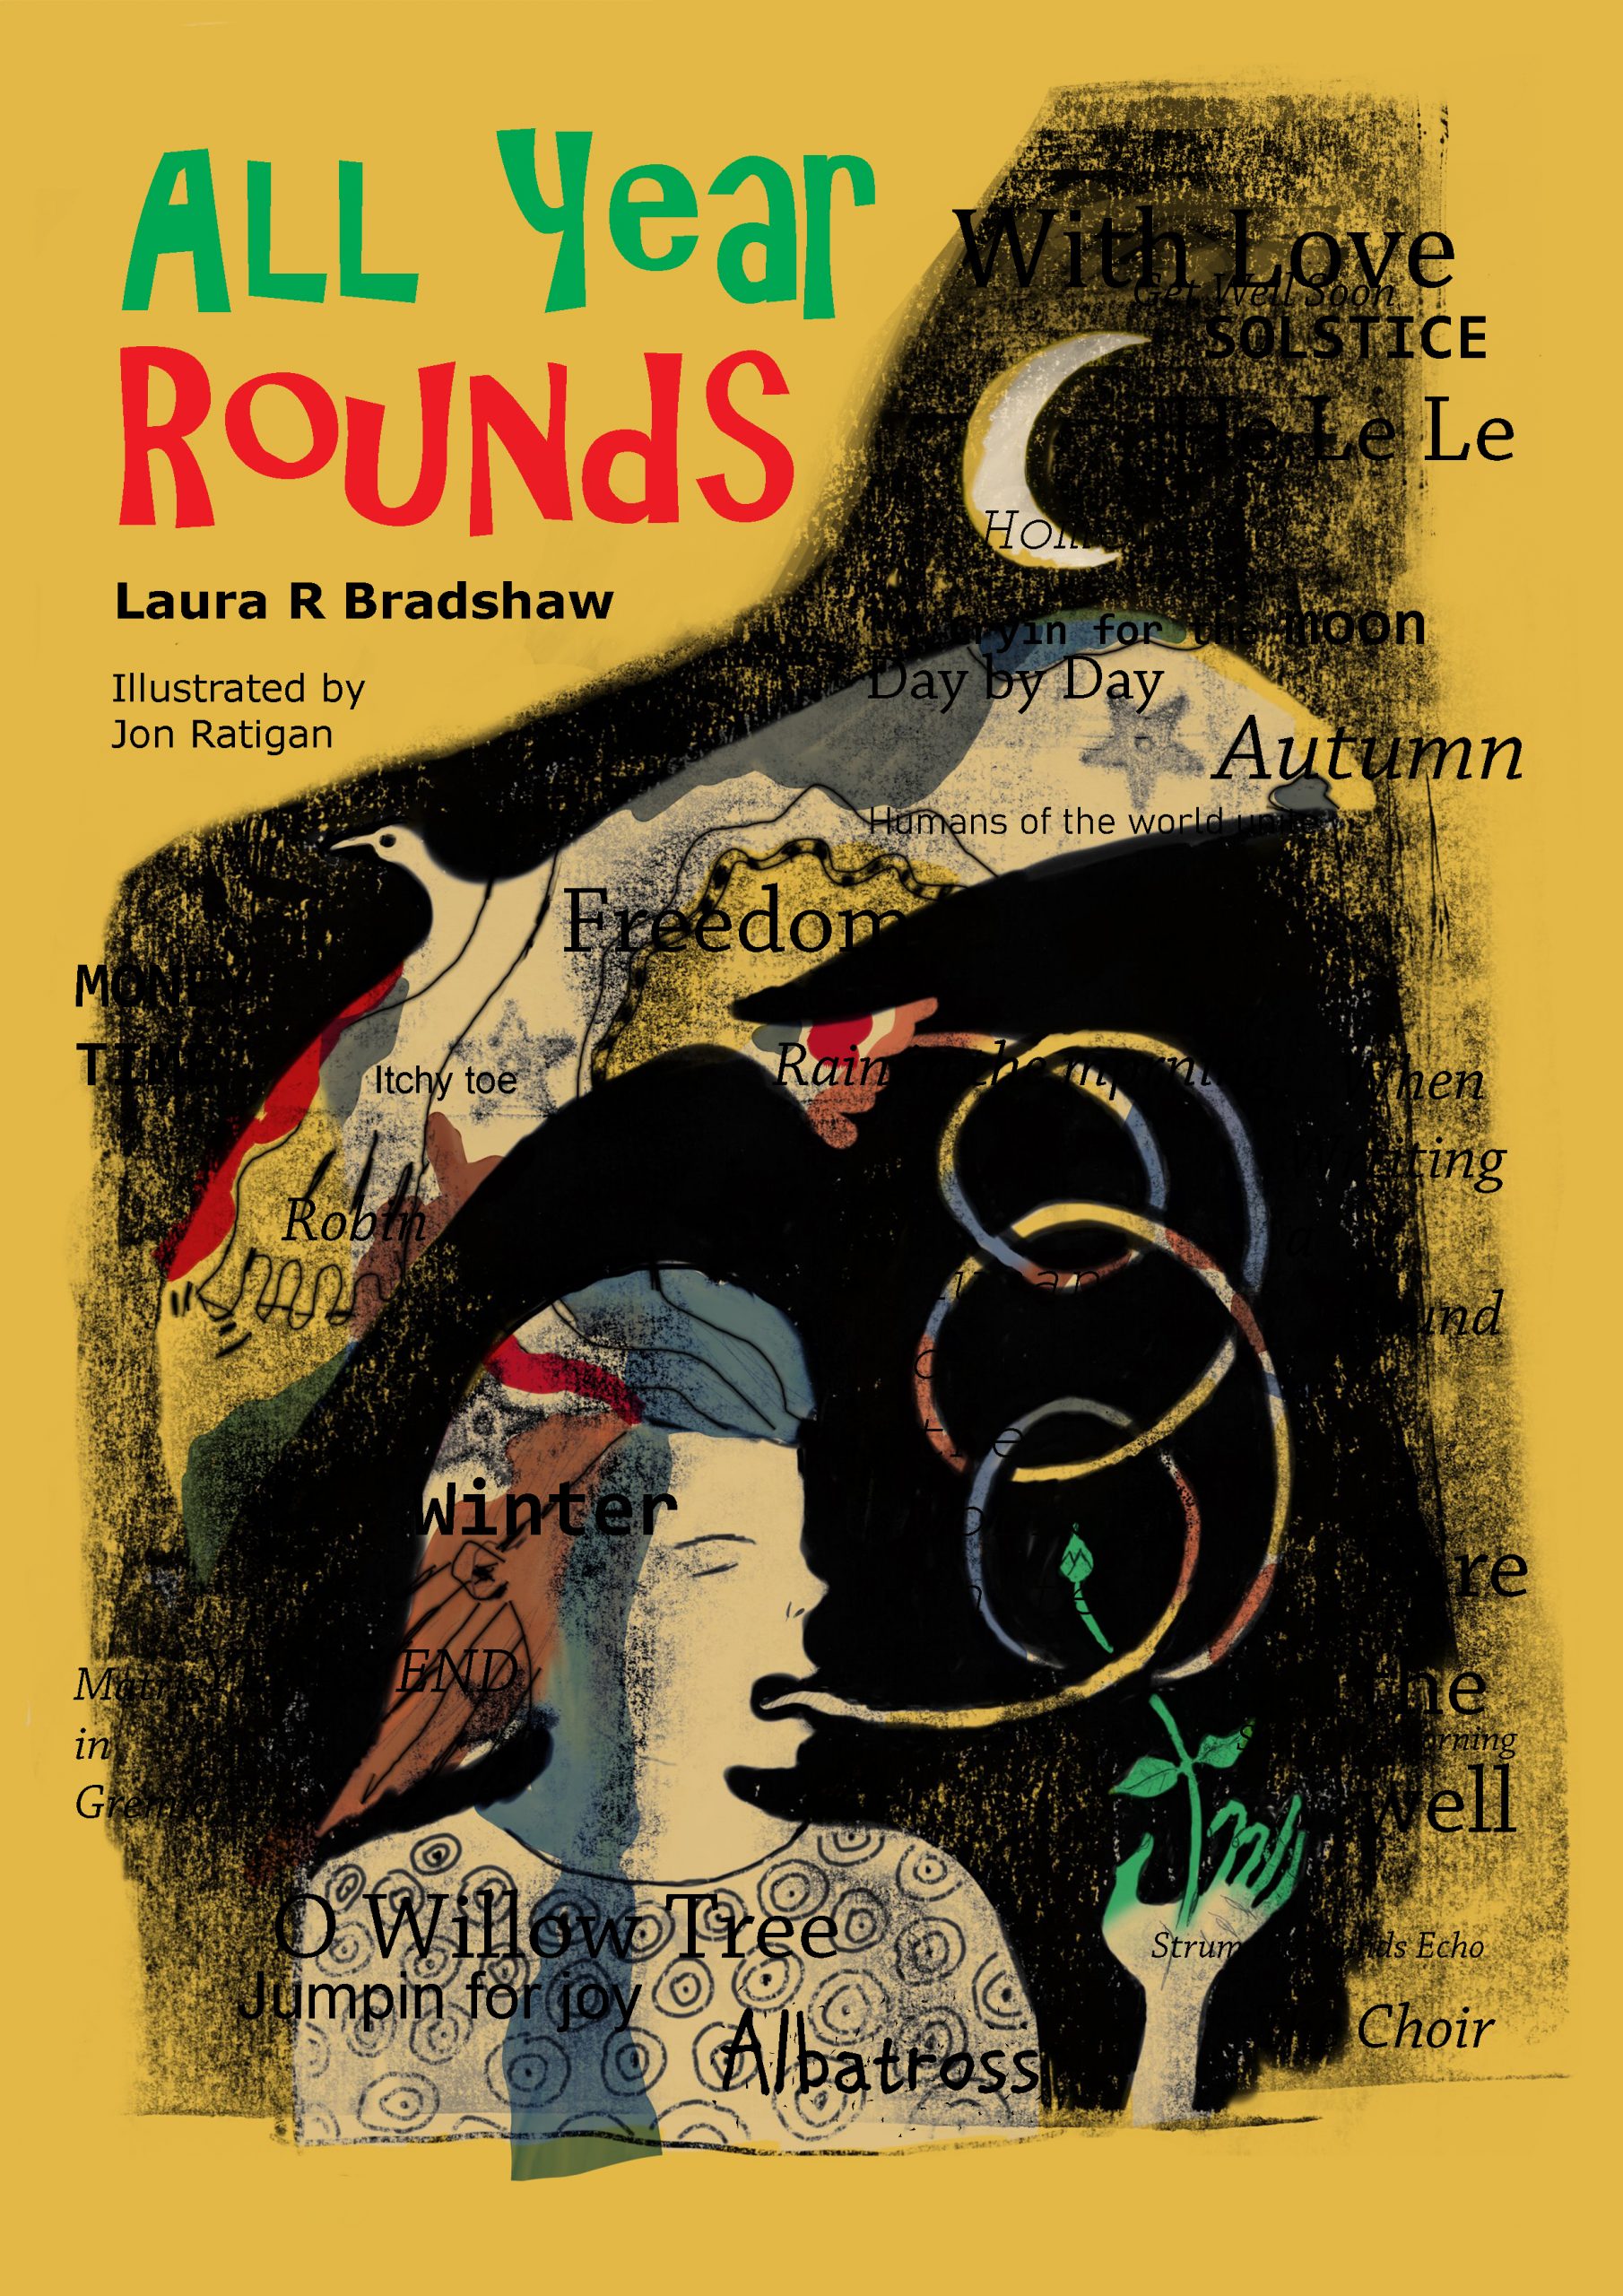 ROUNDS COVER w text FINAL FINAL EXTENDED